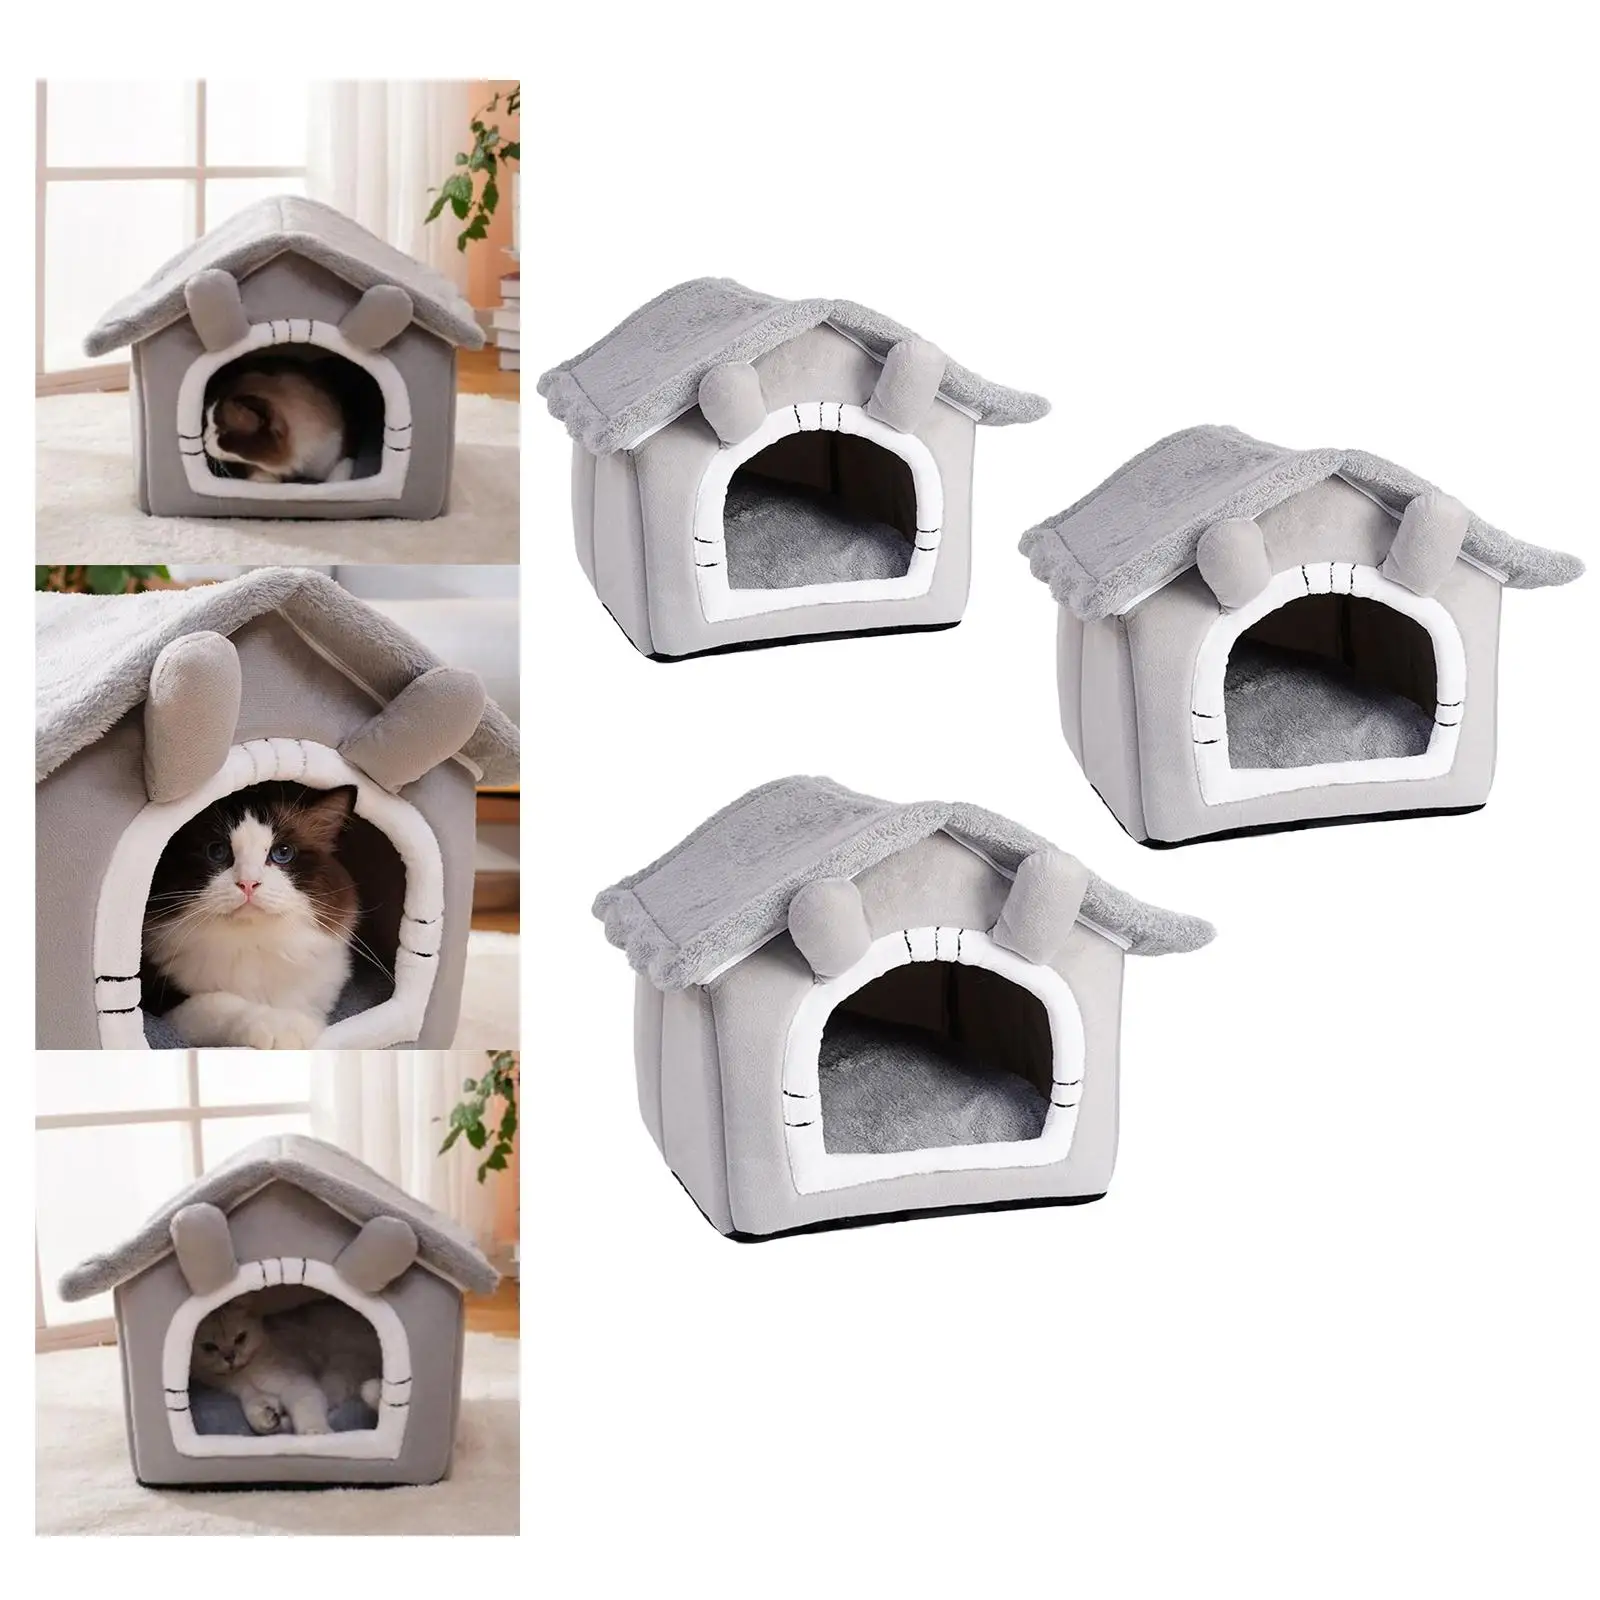 Bed Sleep Kennel Cozy Nest Removable Cushion Winter Warm